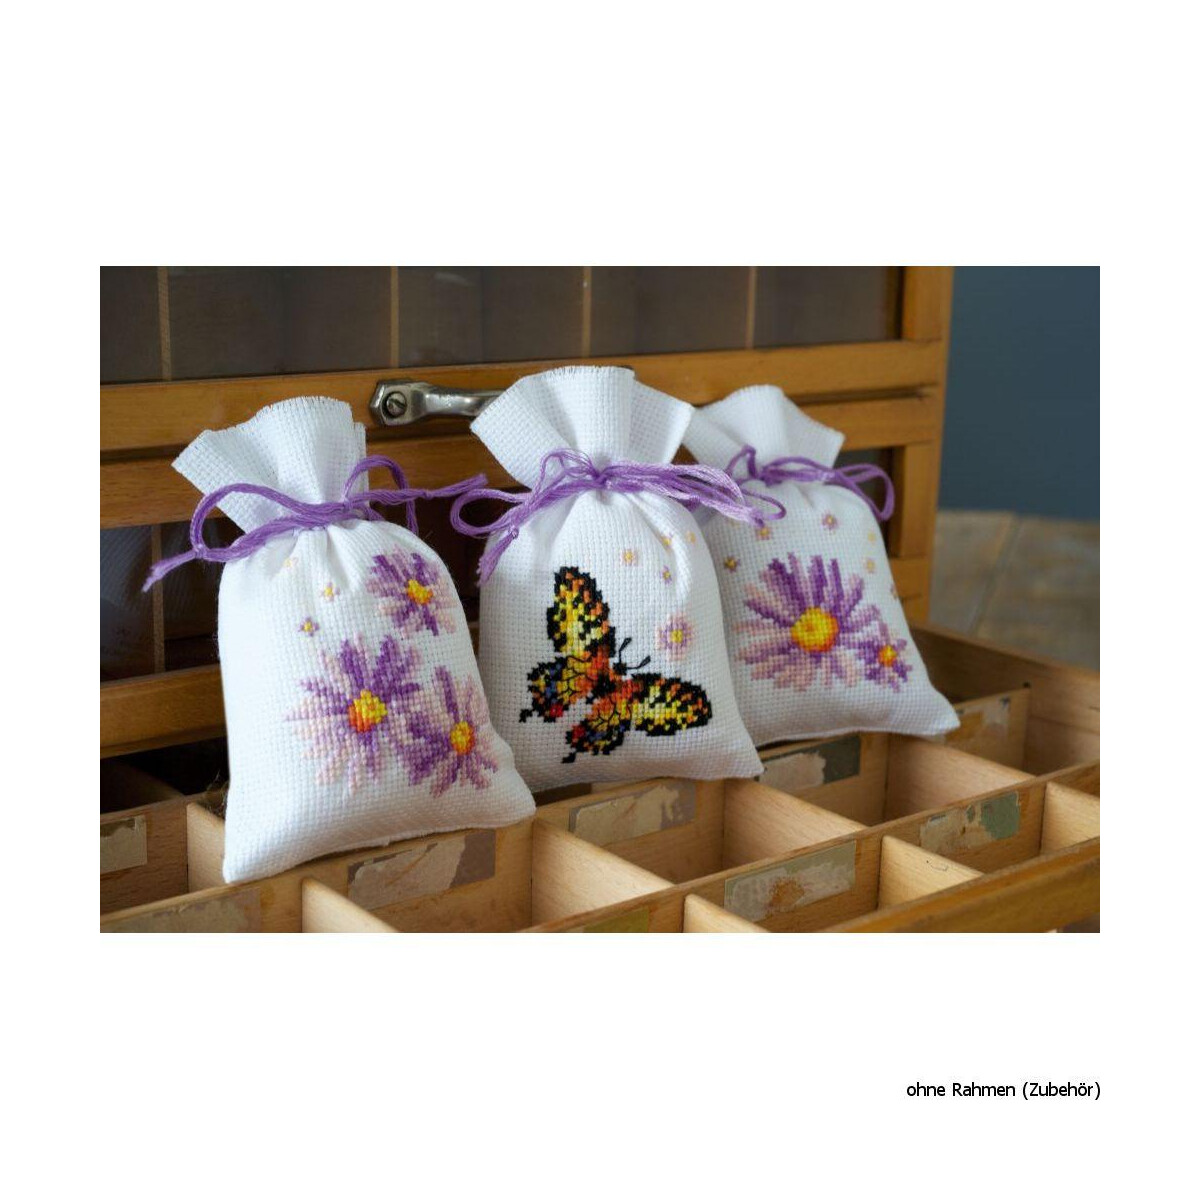 Vervaco counted herbal bags stitch kit Purple asters kit...